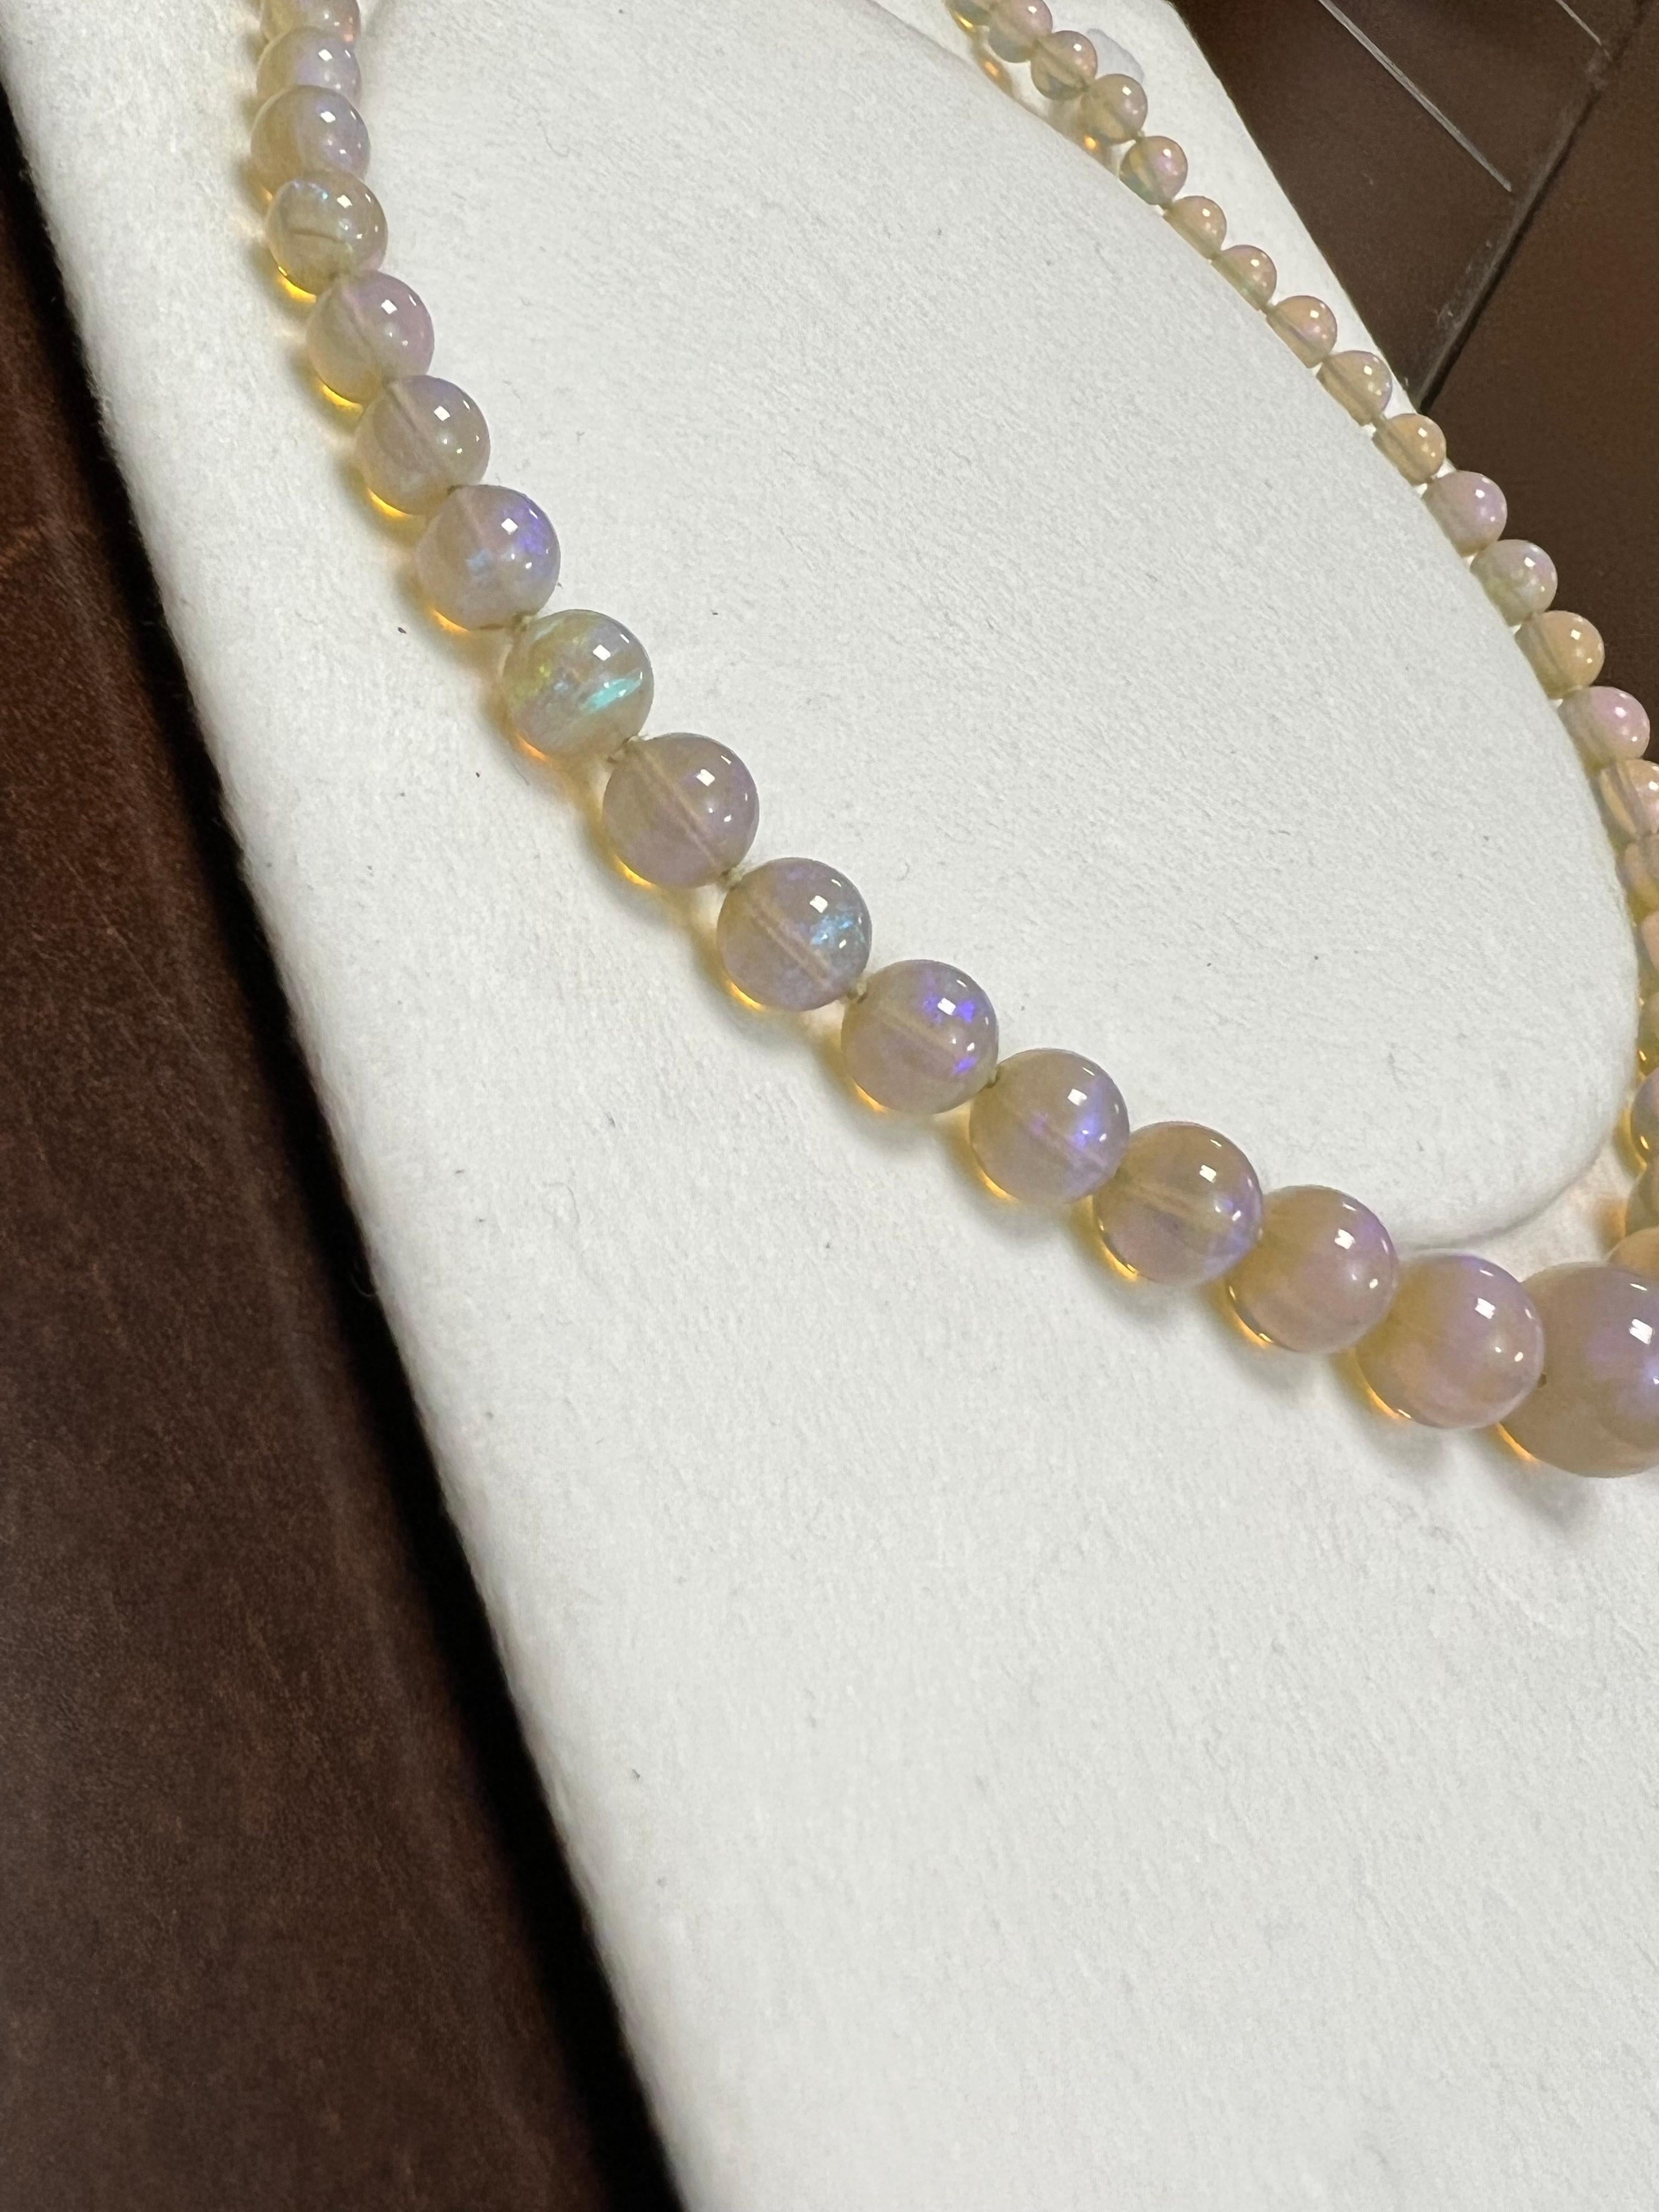 One lady's crystal opal with a multi-color fire color. Average saturation scale with flash fire pattern. Brightness of fire is bright with shape, round beads. Measurements are 14.0-5.0 mm. Gross weight is 190 grams. 